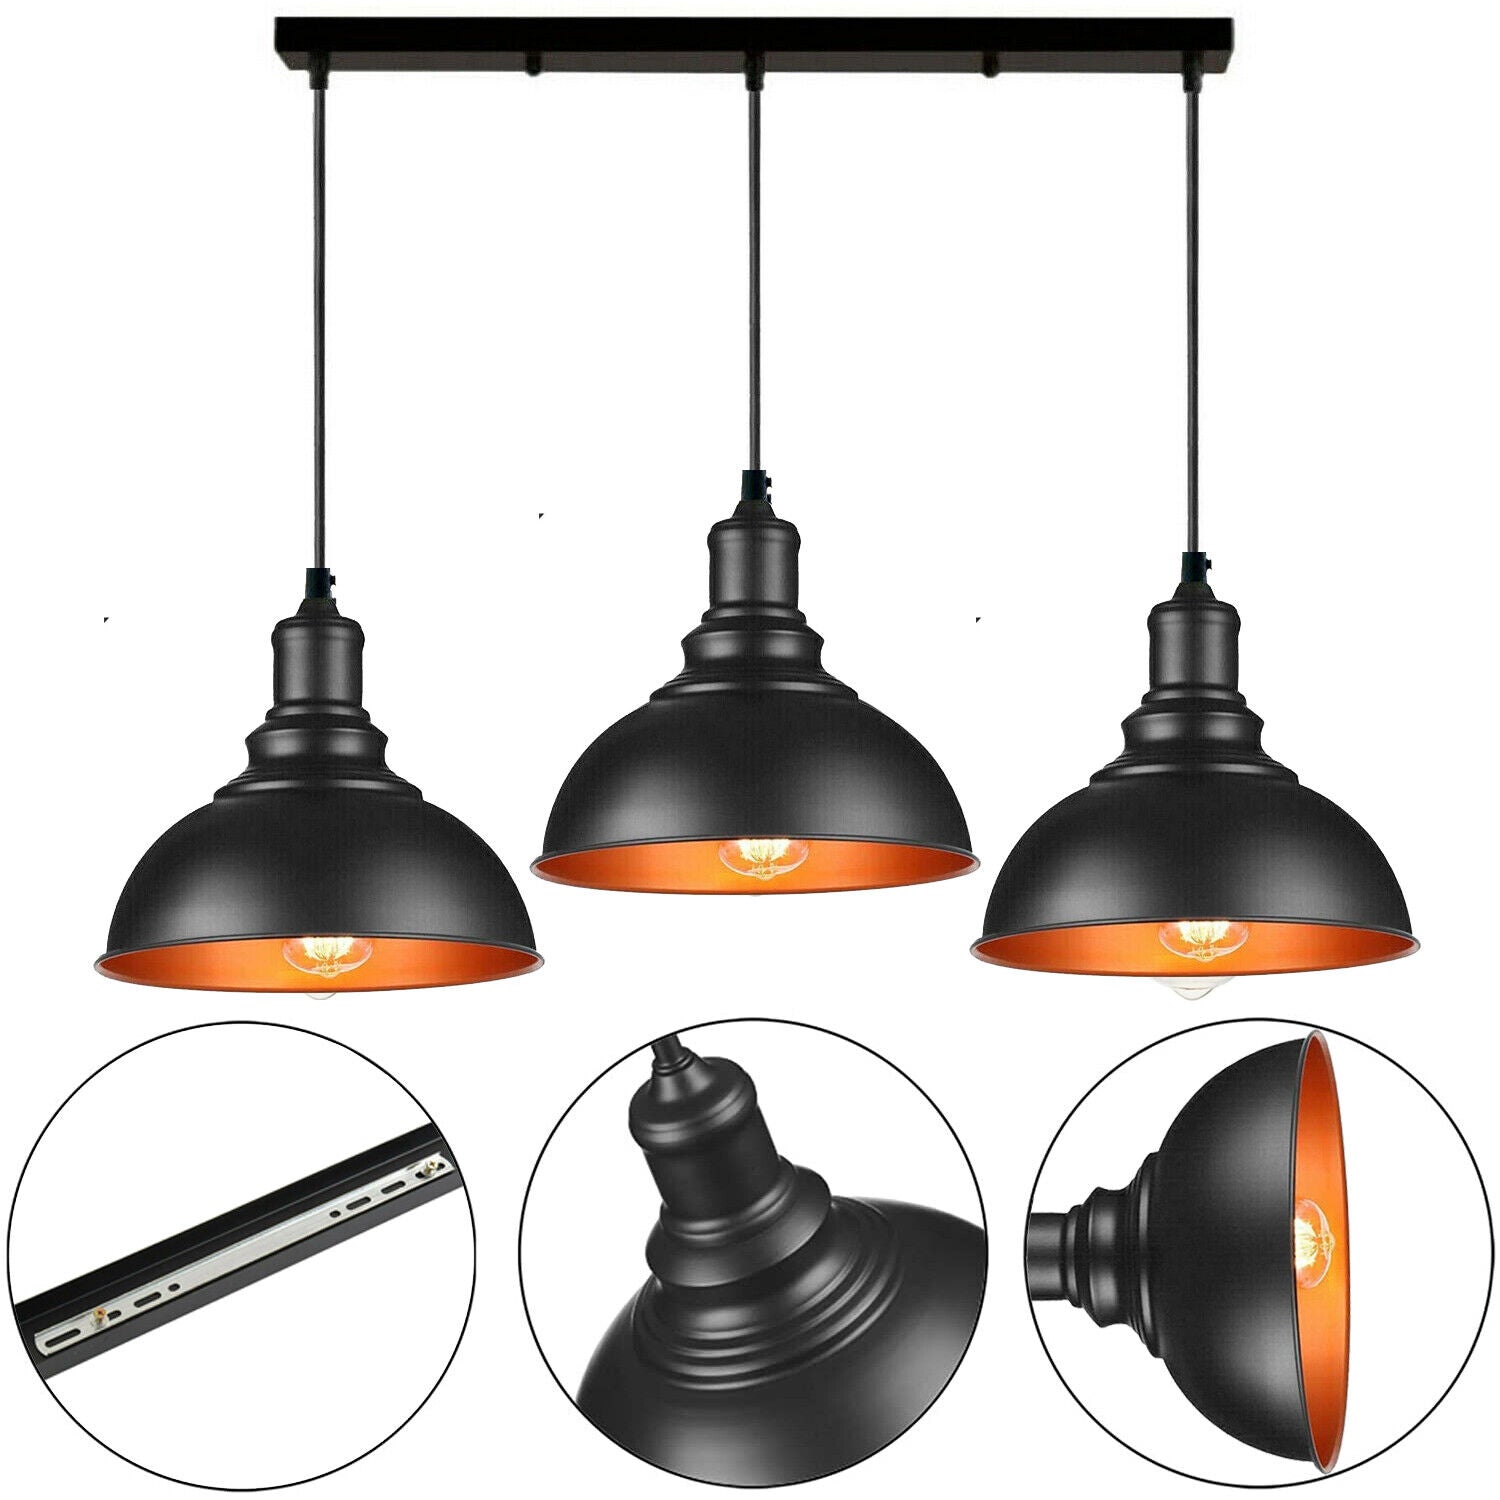 Metal dome shade ceiling pendant light